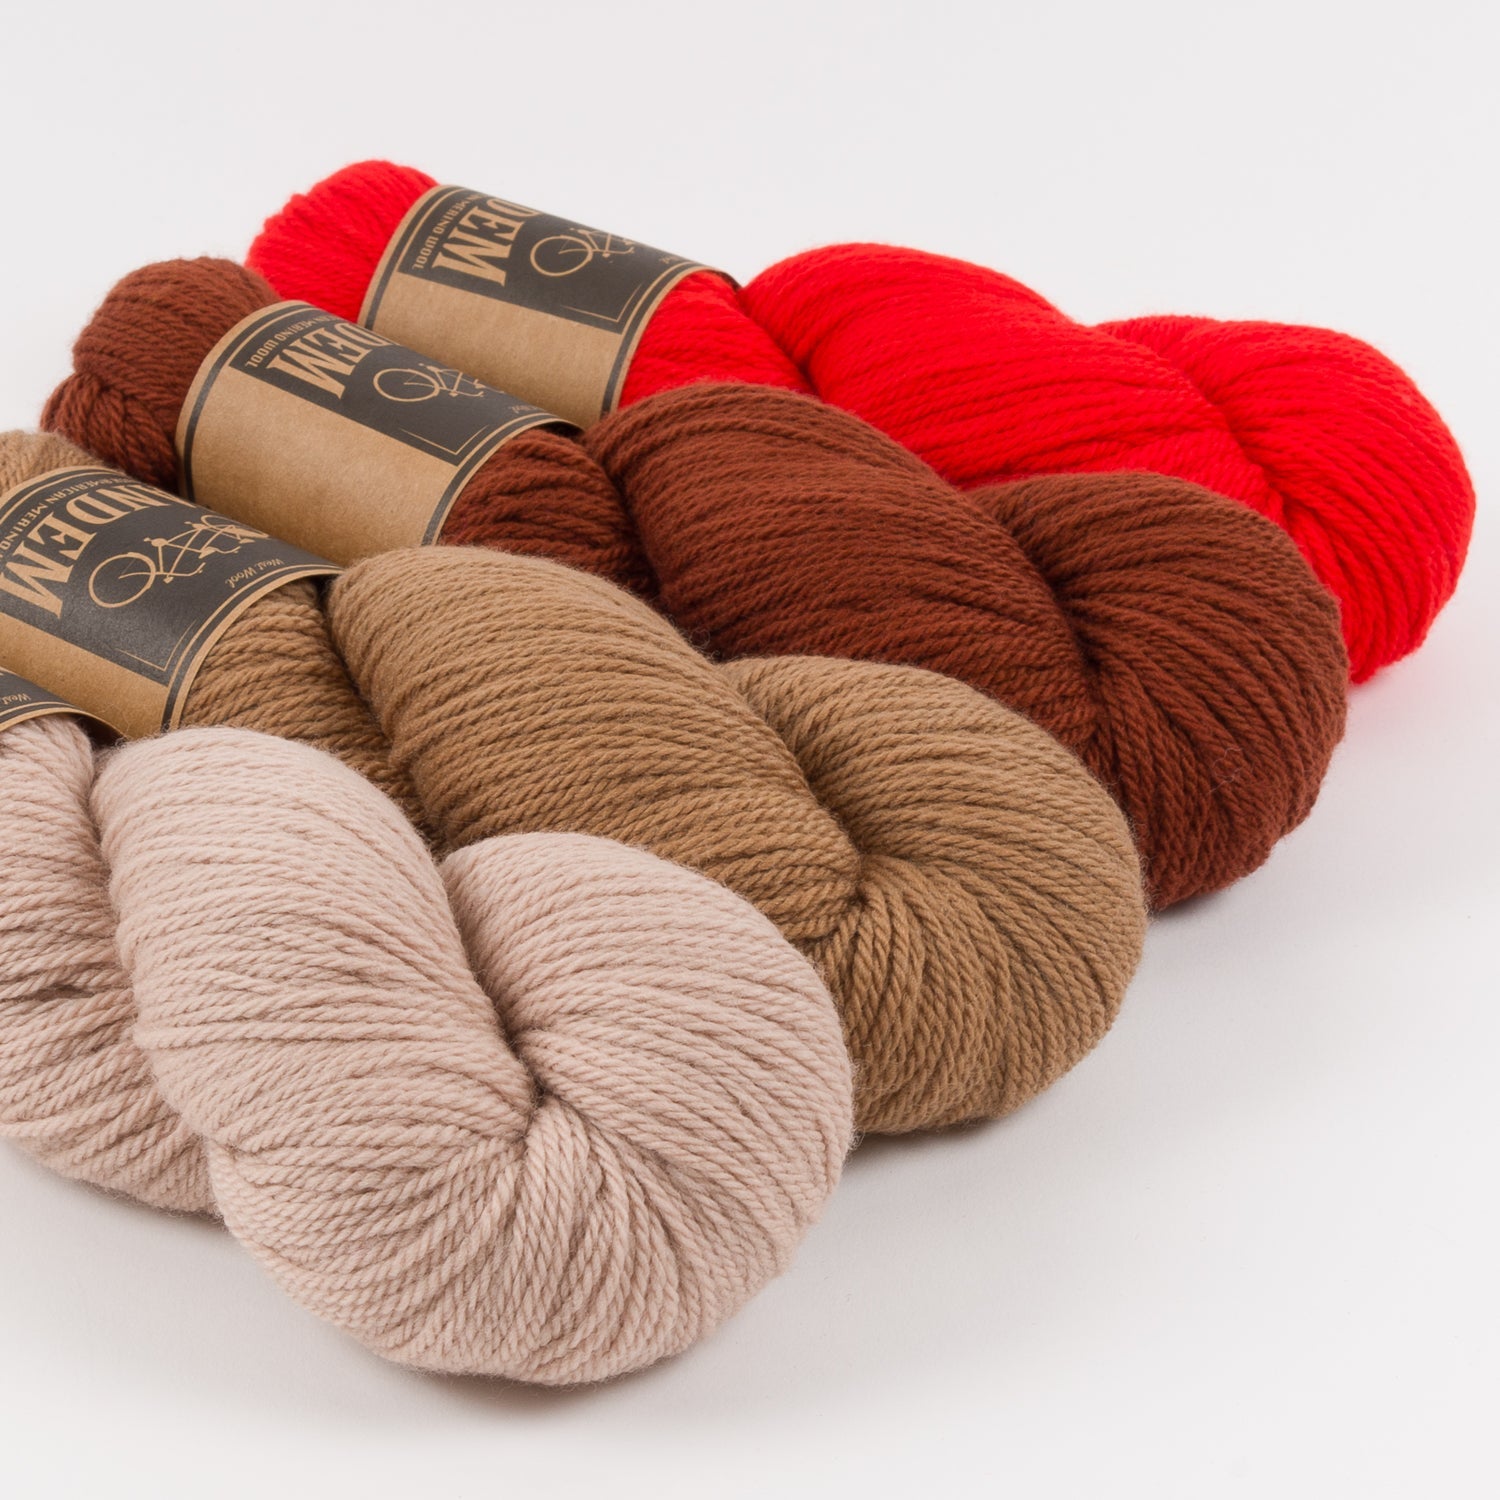 WESTKNITS KIT - NUTTY BISCUITS